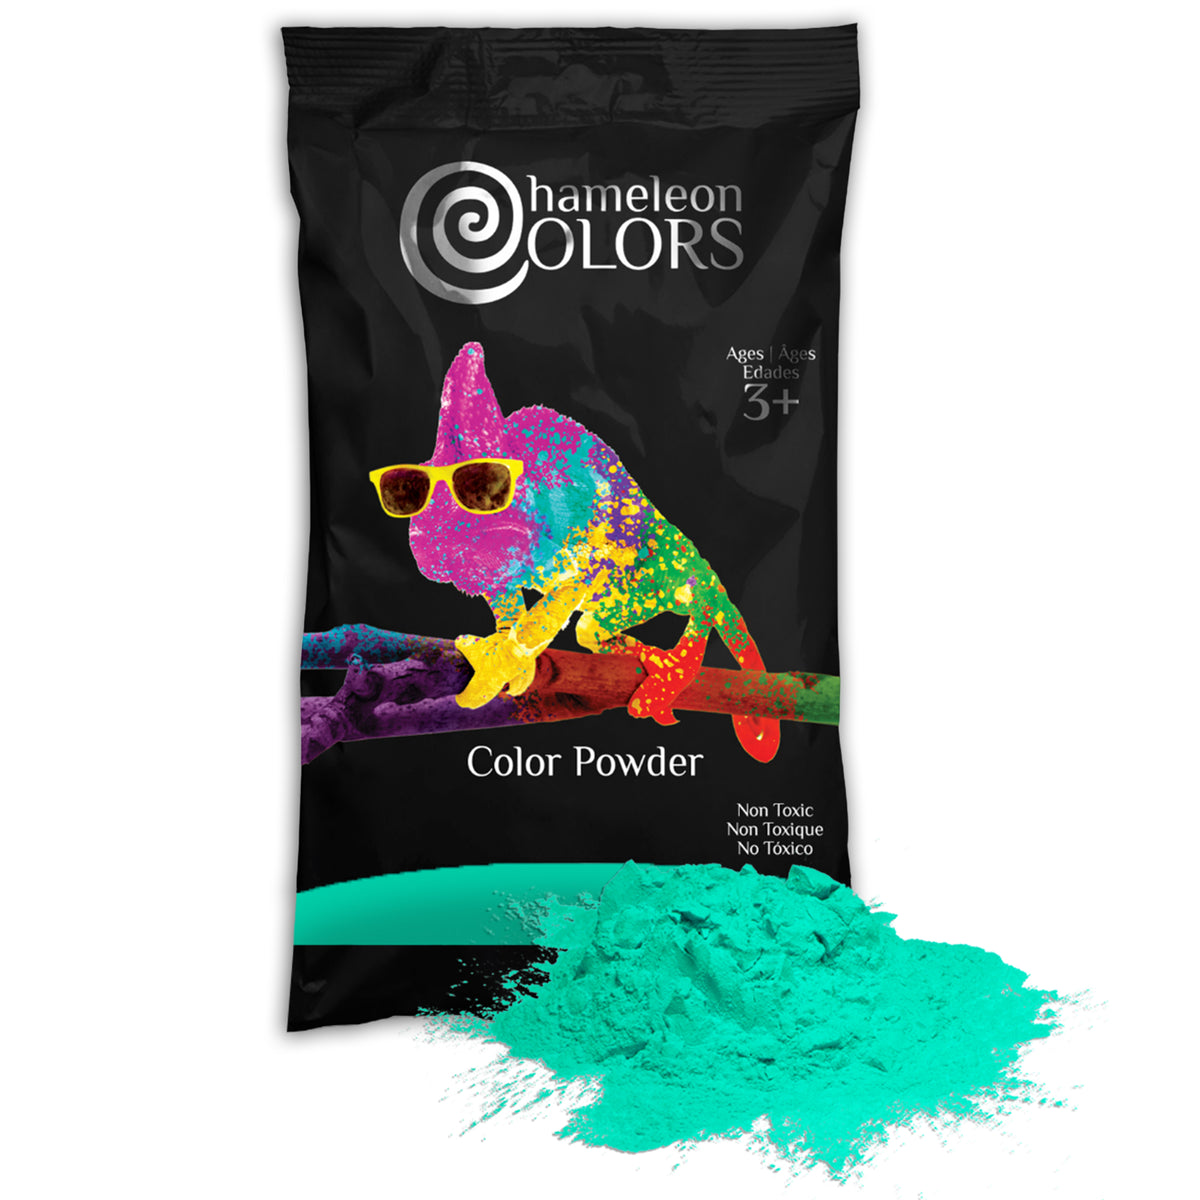 Chameleon Colors Holi Color Powder- Bonus Pack 10Pack Plus A Free Packet of White 70g Each Premium Colors- Red Yellow Navy Blue